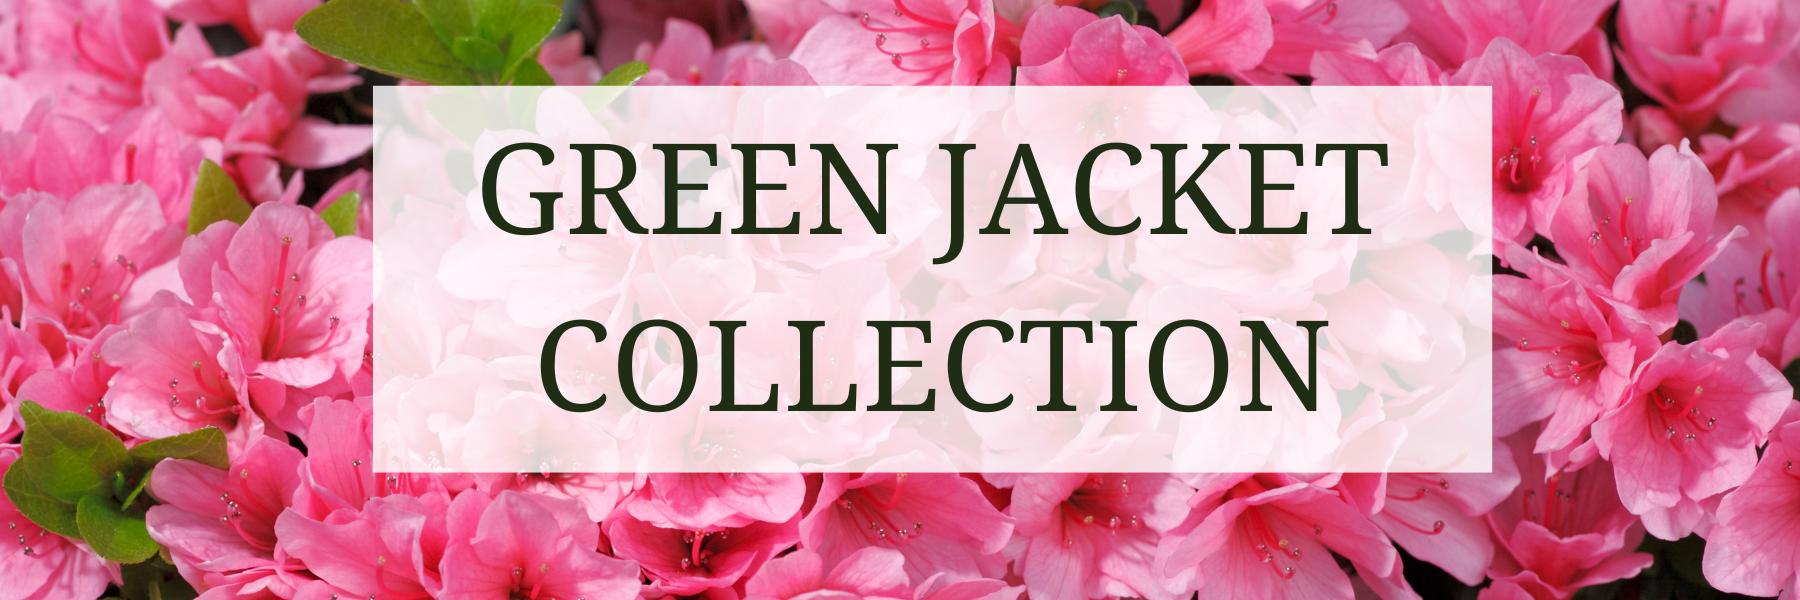 Green Jacket Collection | Austad's Golf - The Leader in Golf Since 1963